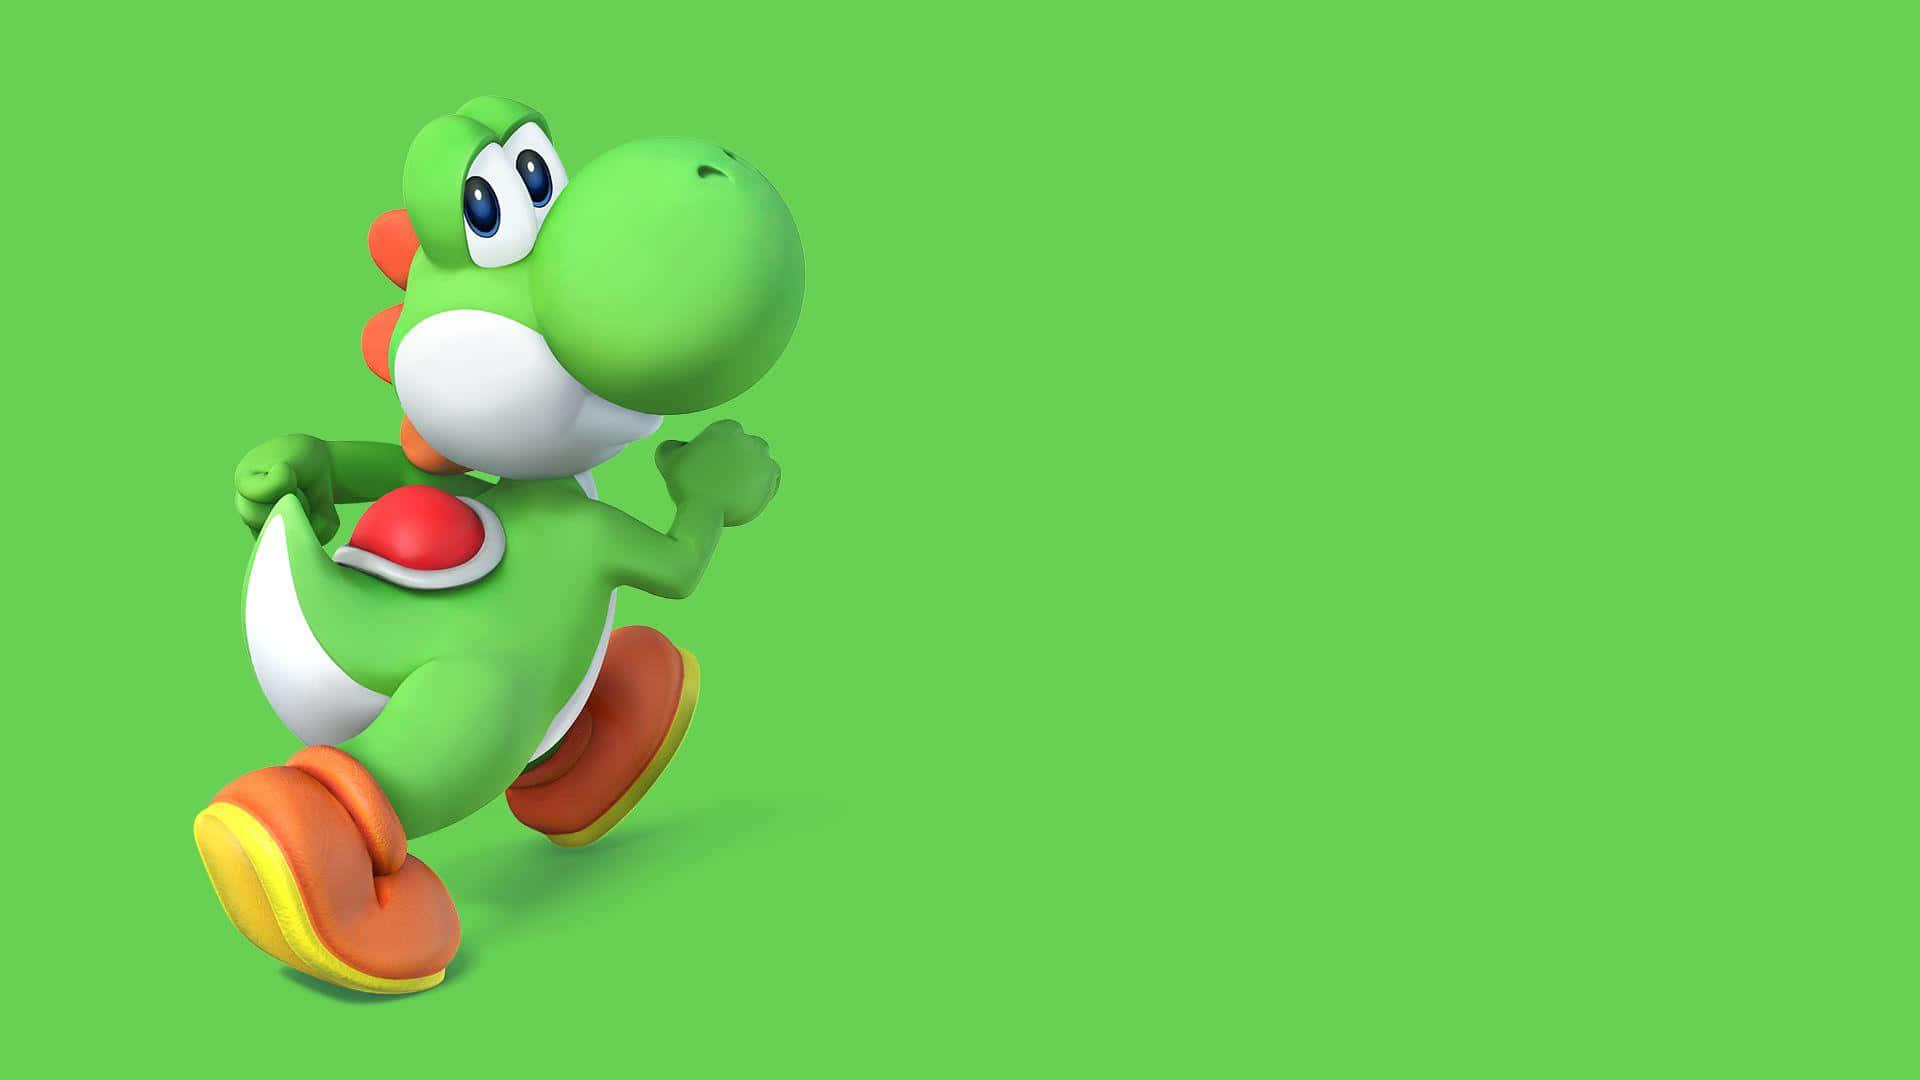 Explore Fantastic Lands With The All-powerful Yoshi